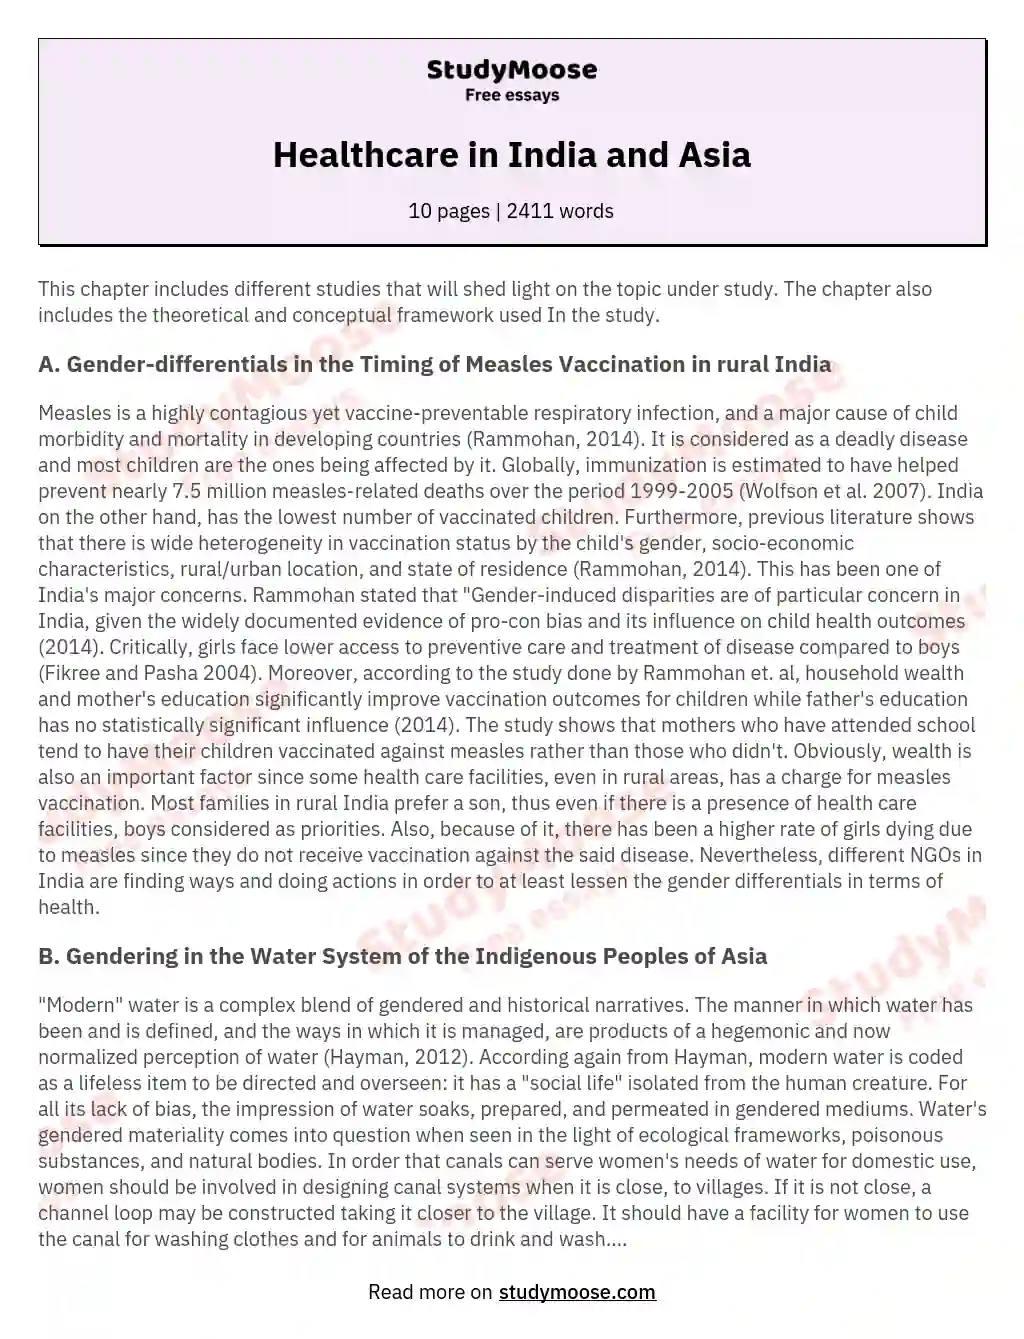 Healthcare in India and Asia essay